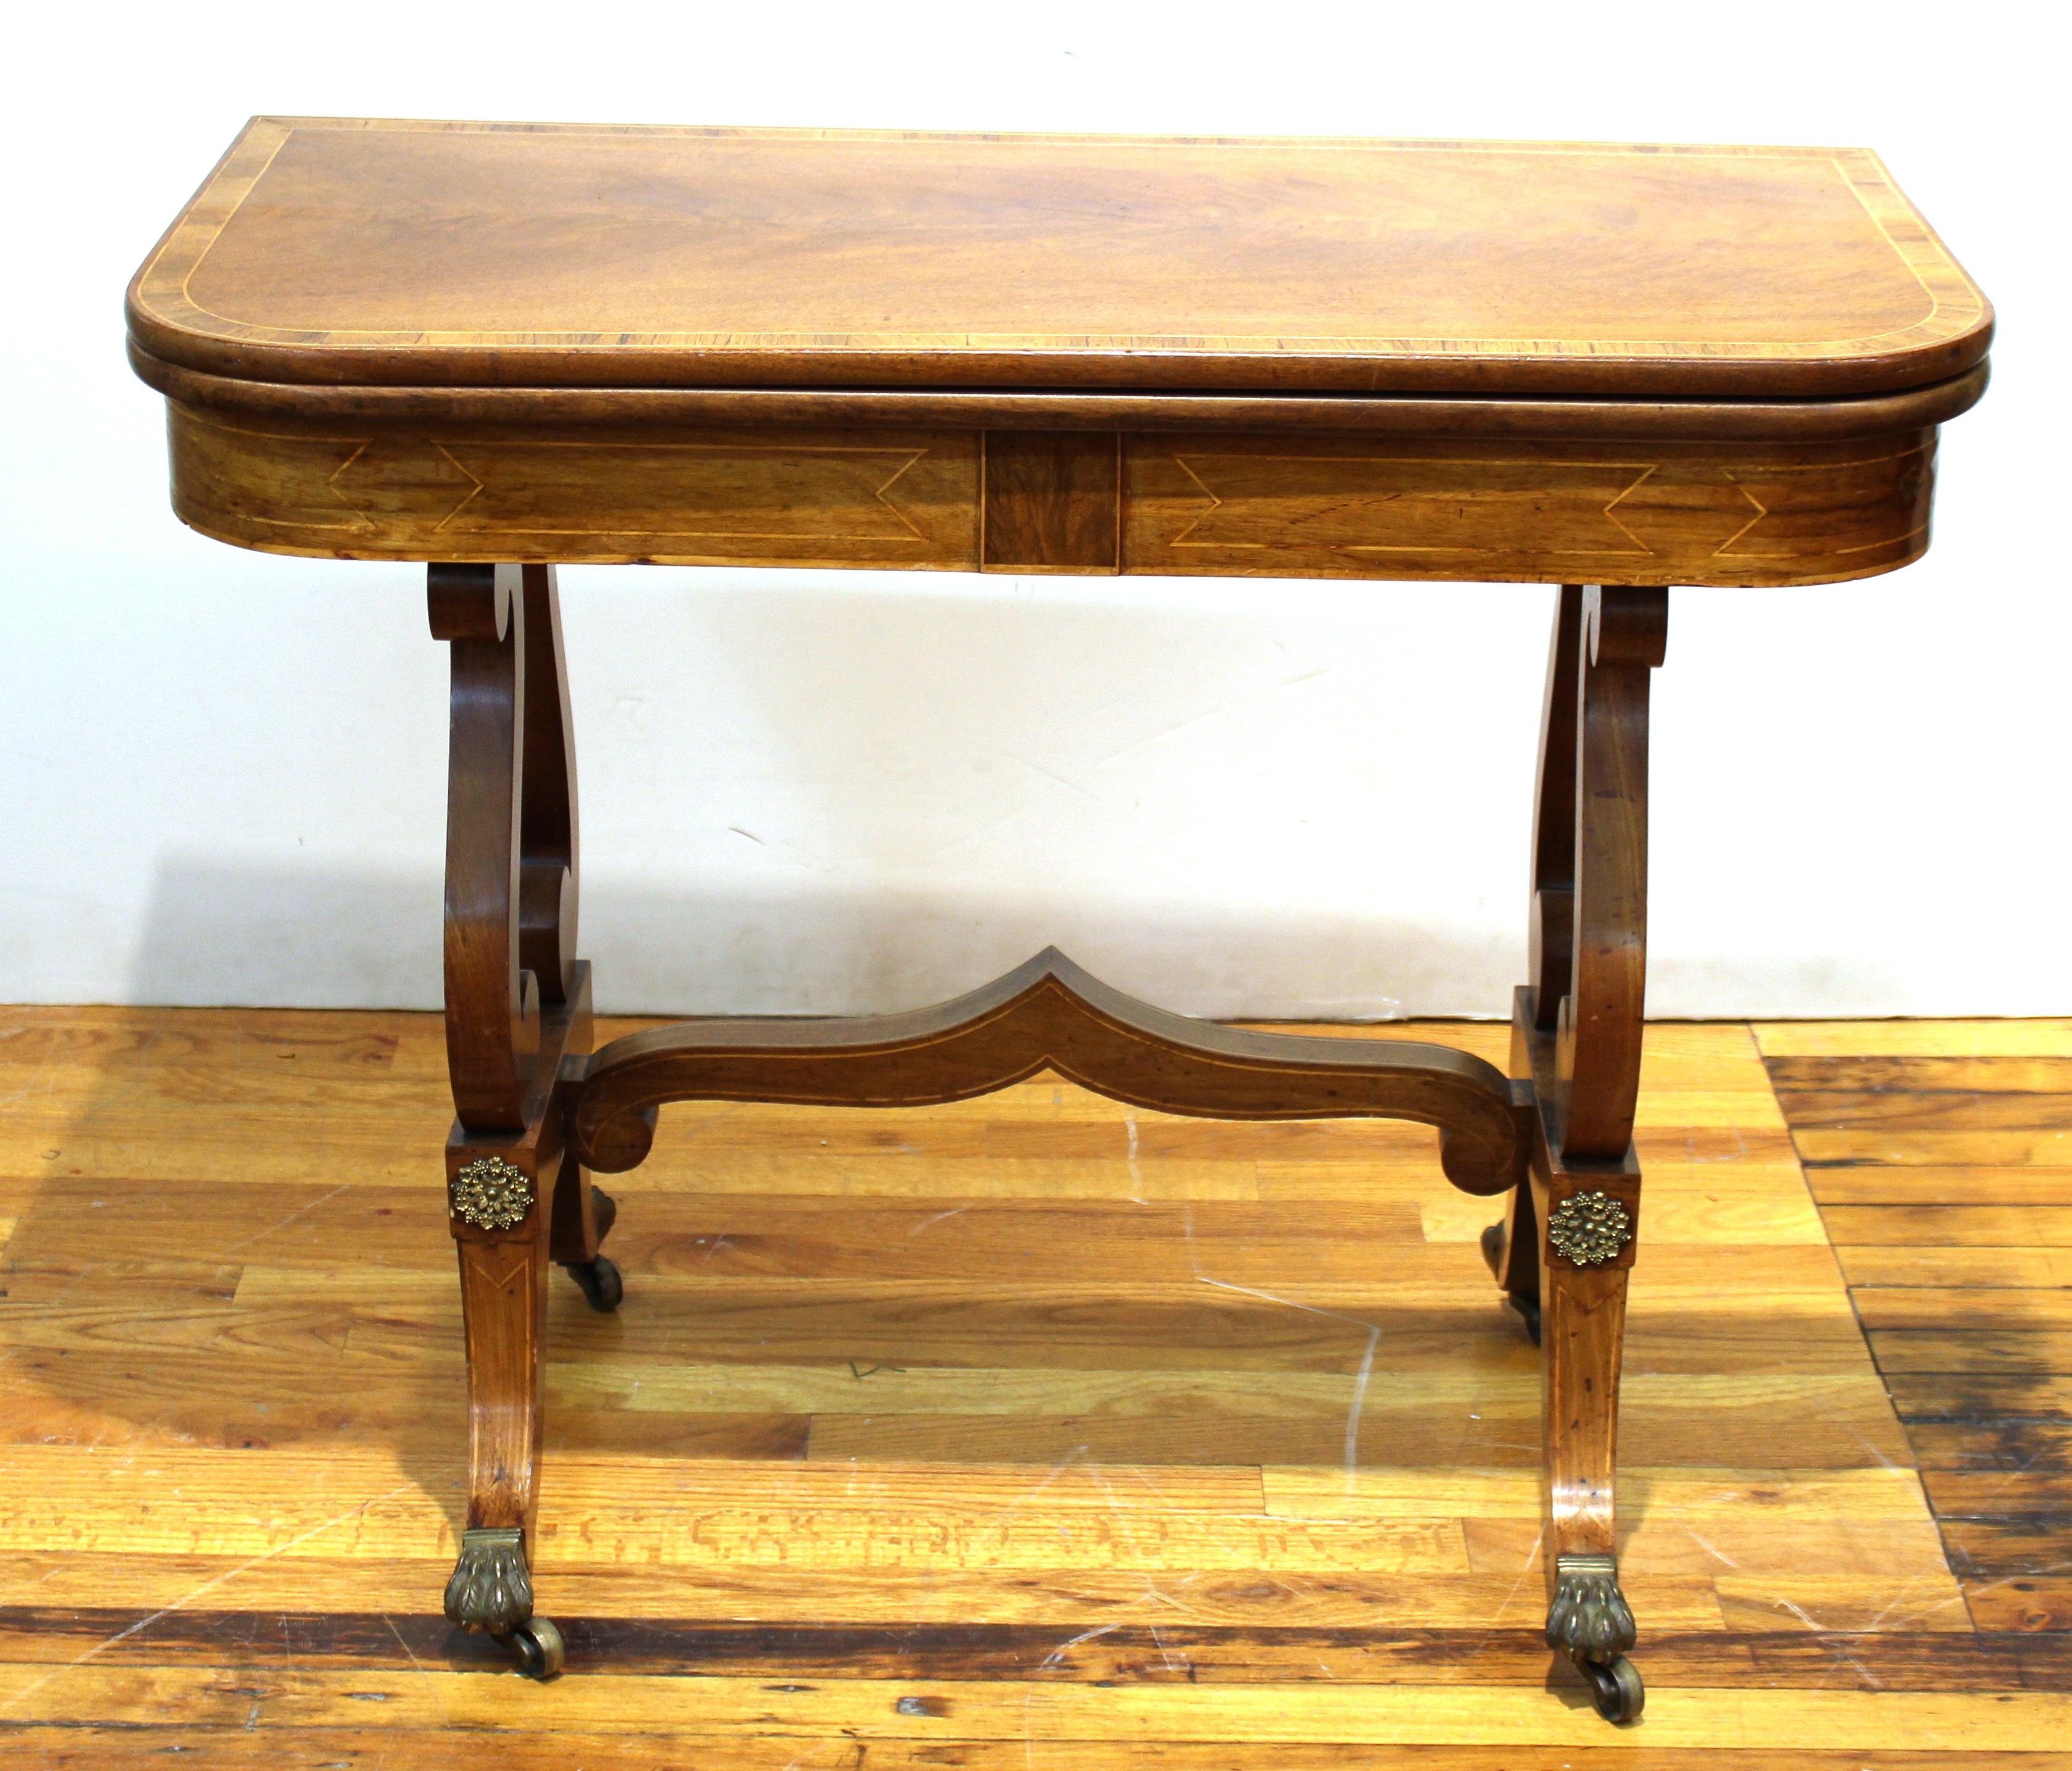 Biedermeier games table in blonde burl with a mahogany veneered lyre base atop scroll feet with metal embellishments and a flip top. The piece dates from the early 19th century and is in great antique shape.